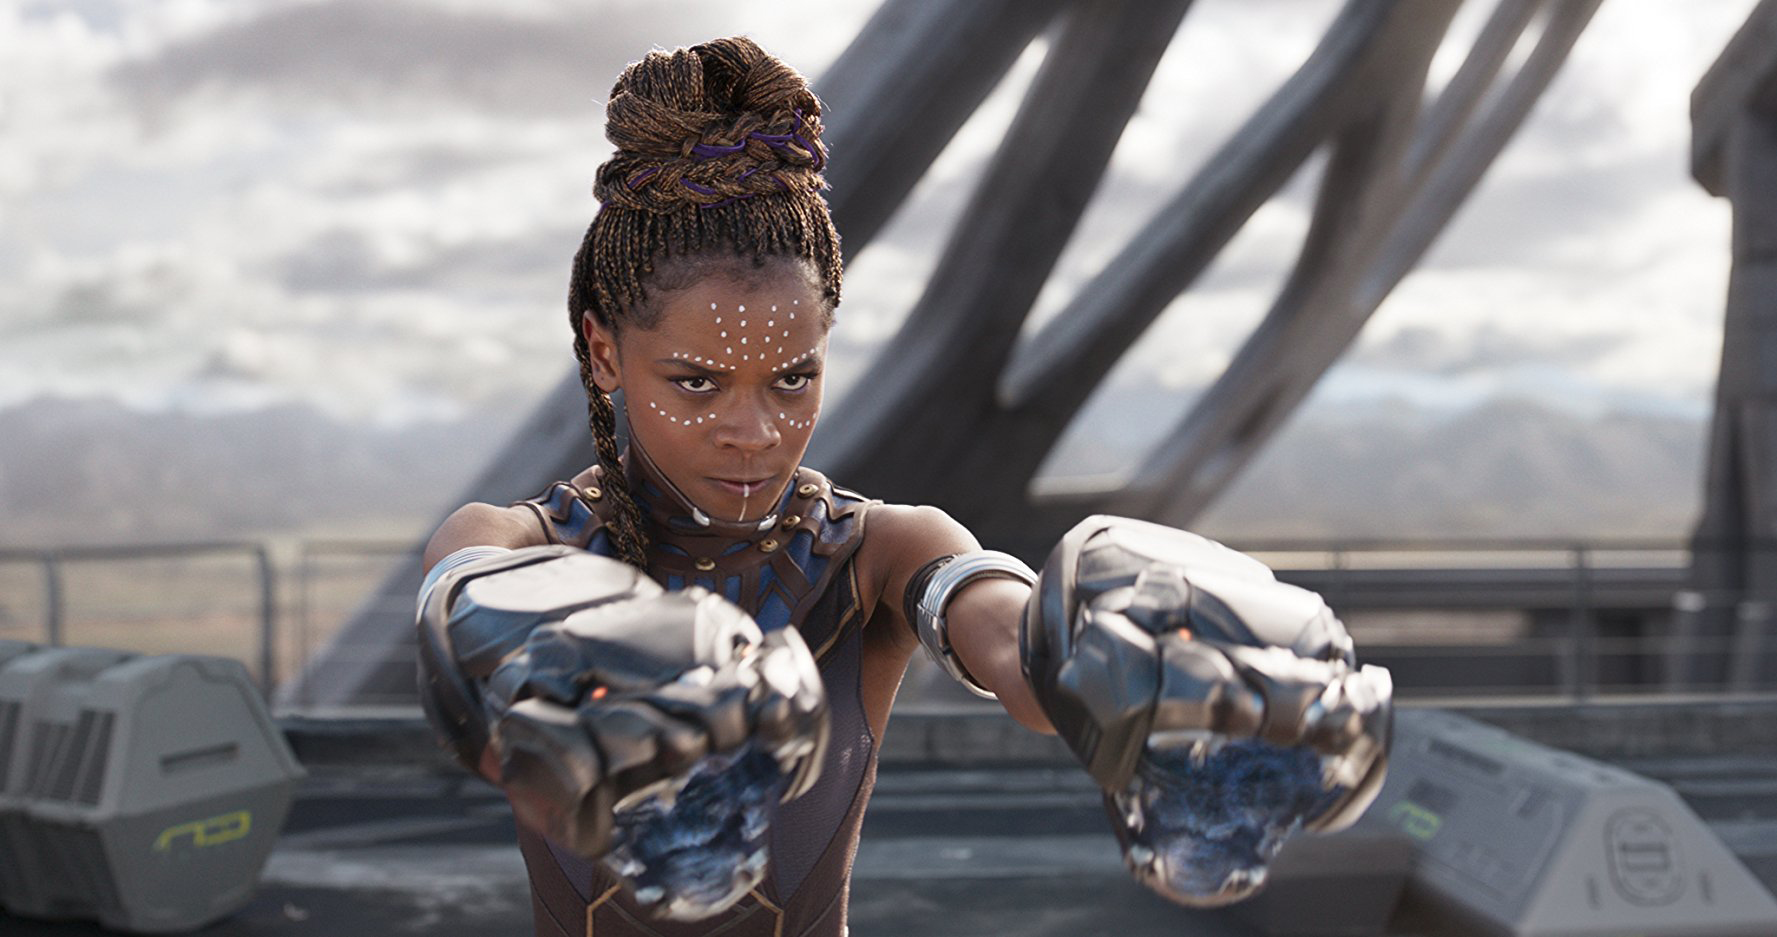 Princess Shuri, played by Letitia Wright, puts the technologically advanced weapons she helped design and build to use in helping her brother defend the kingdom of Wakanda in "Black Panther." Marvel Films photo